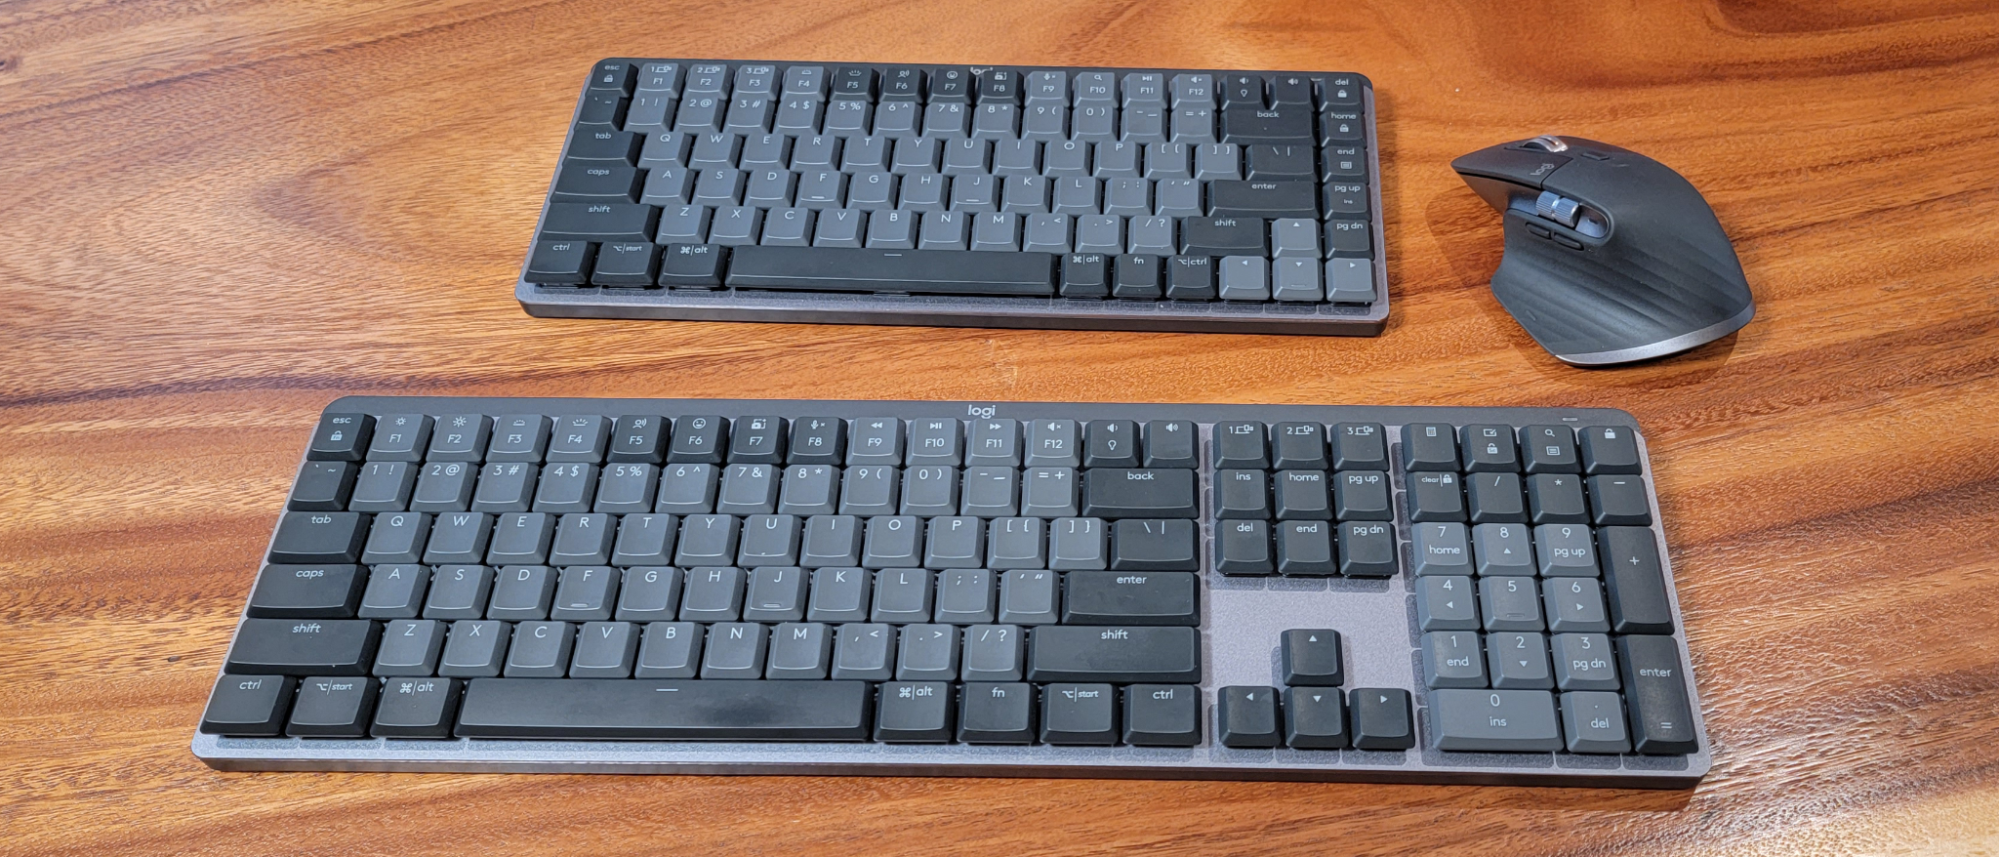 toernooi Pionier component Logitech MX Mechanical Keyboard Review: Easy Device Switching, Low Profile  | Tom's Hardware